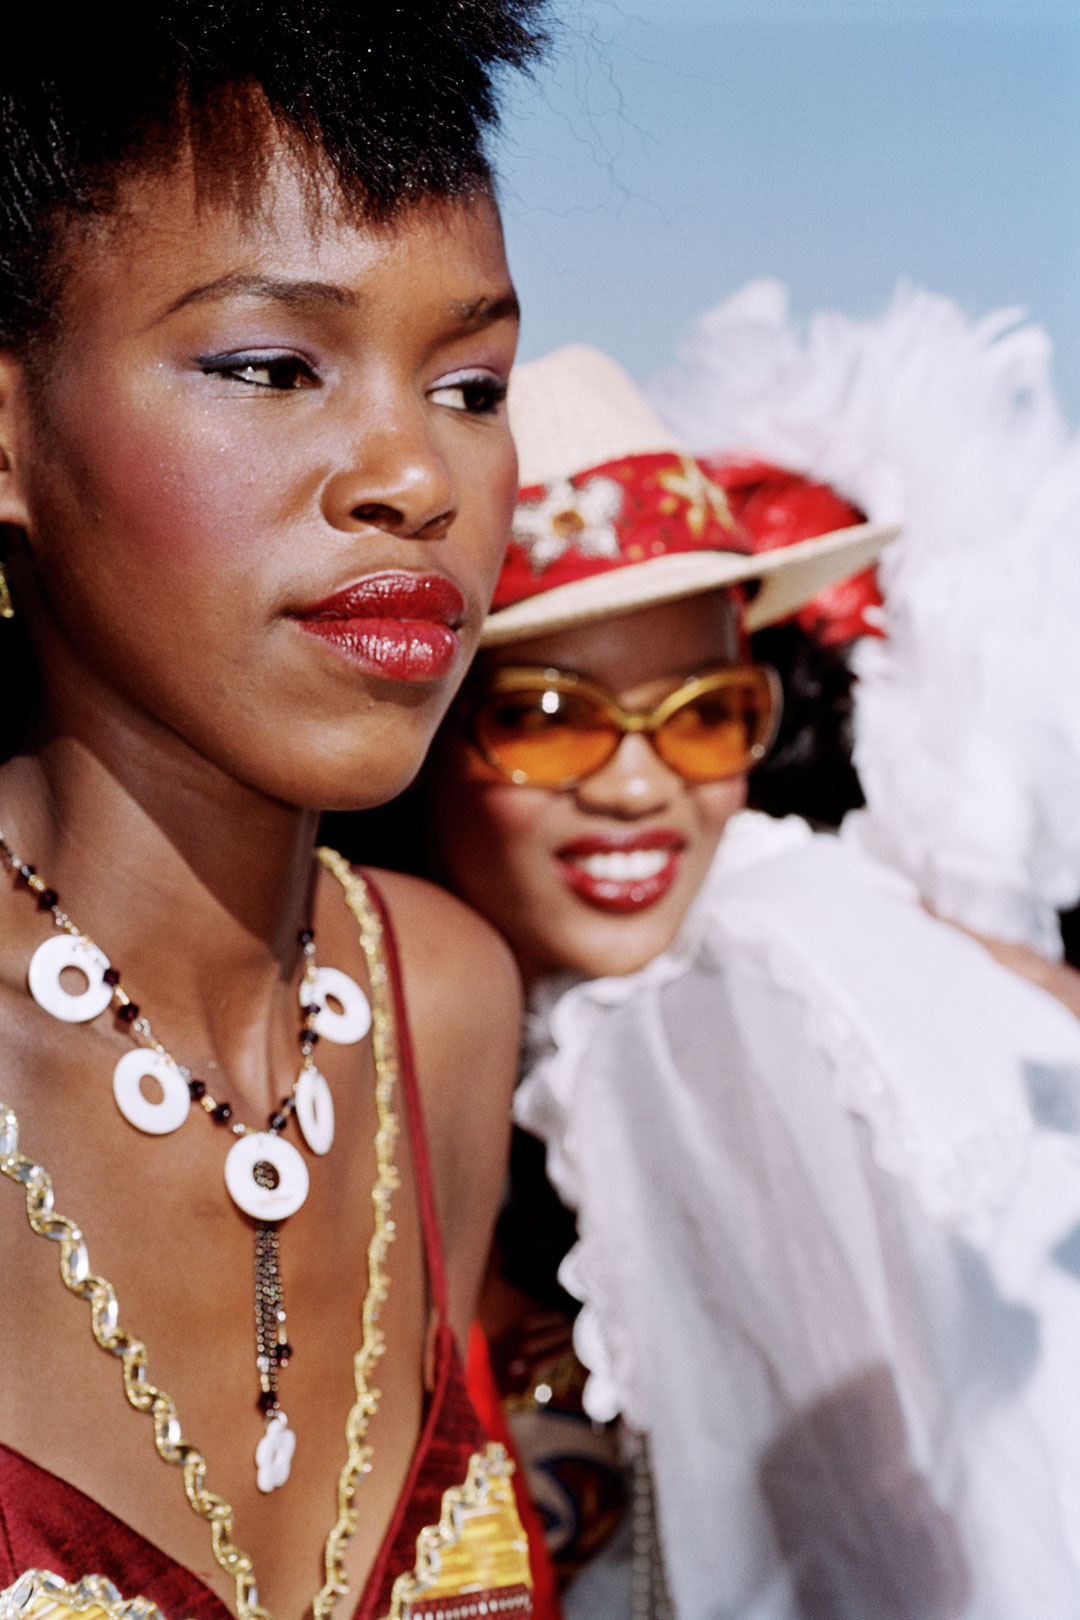 Durban July races, South Africa, 2005, from Only Human by Martin Parr